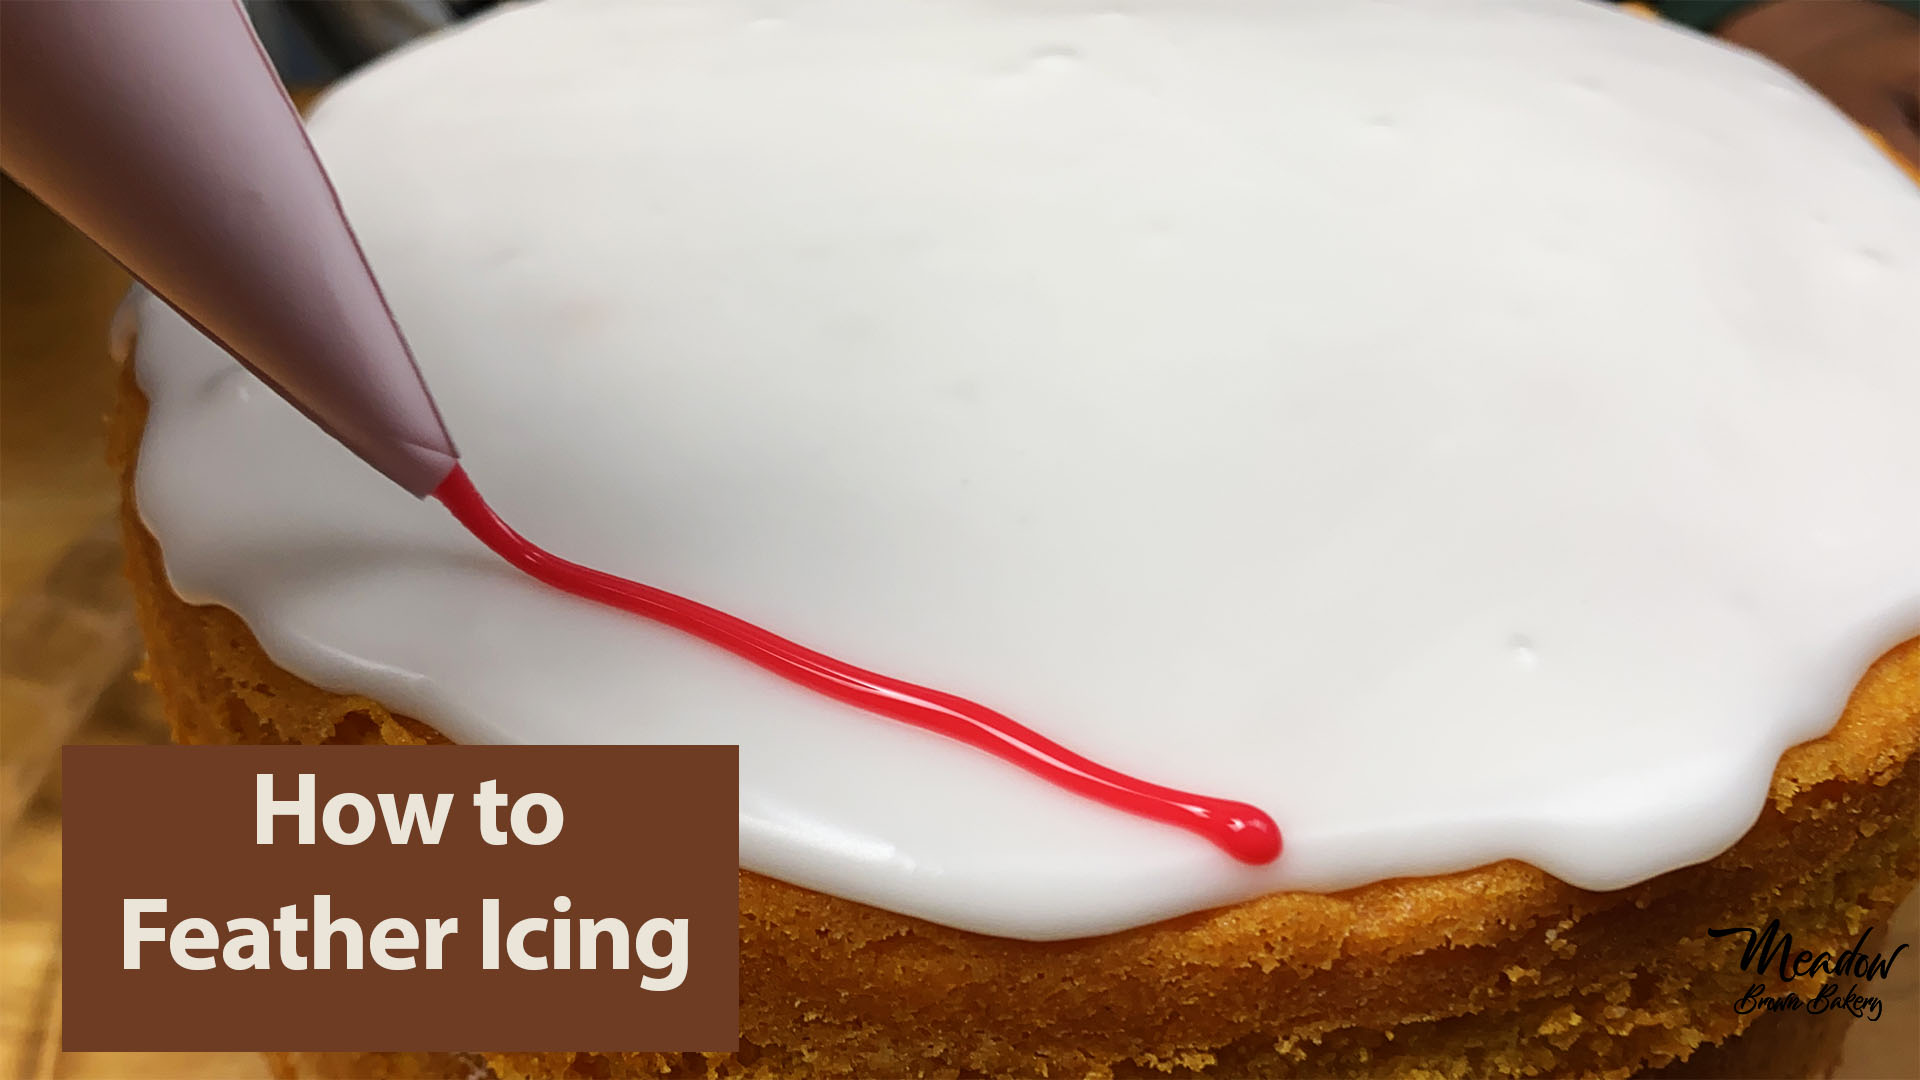 How to feather icing : Feather icing on biscuits